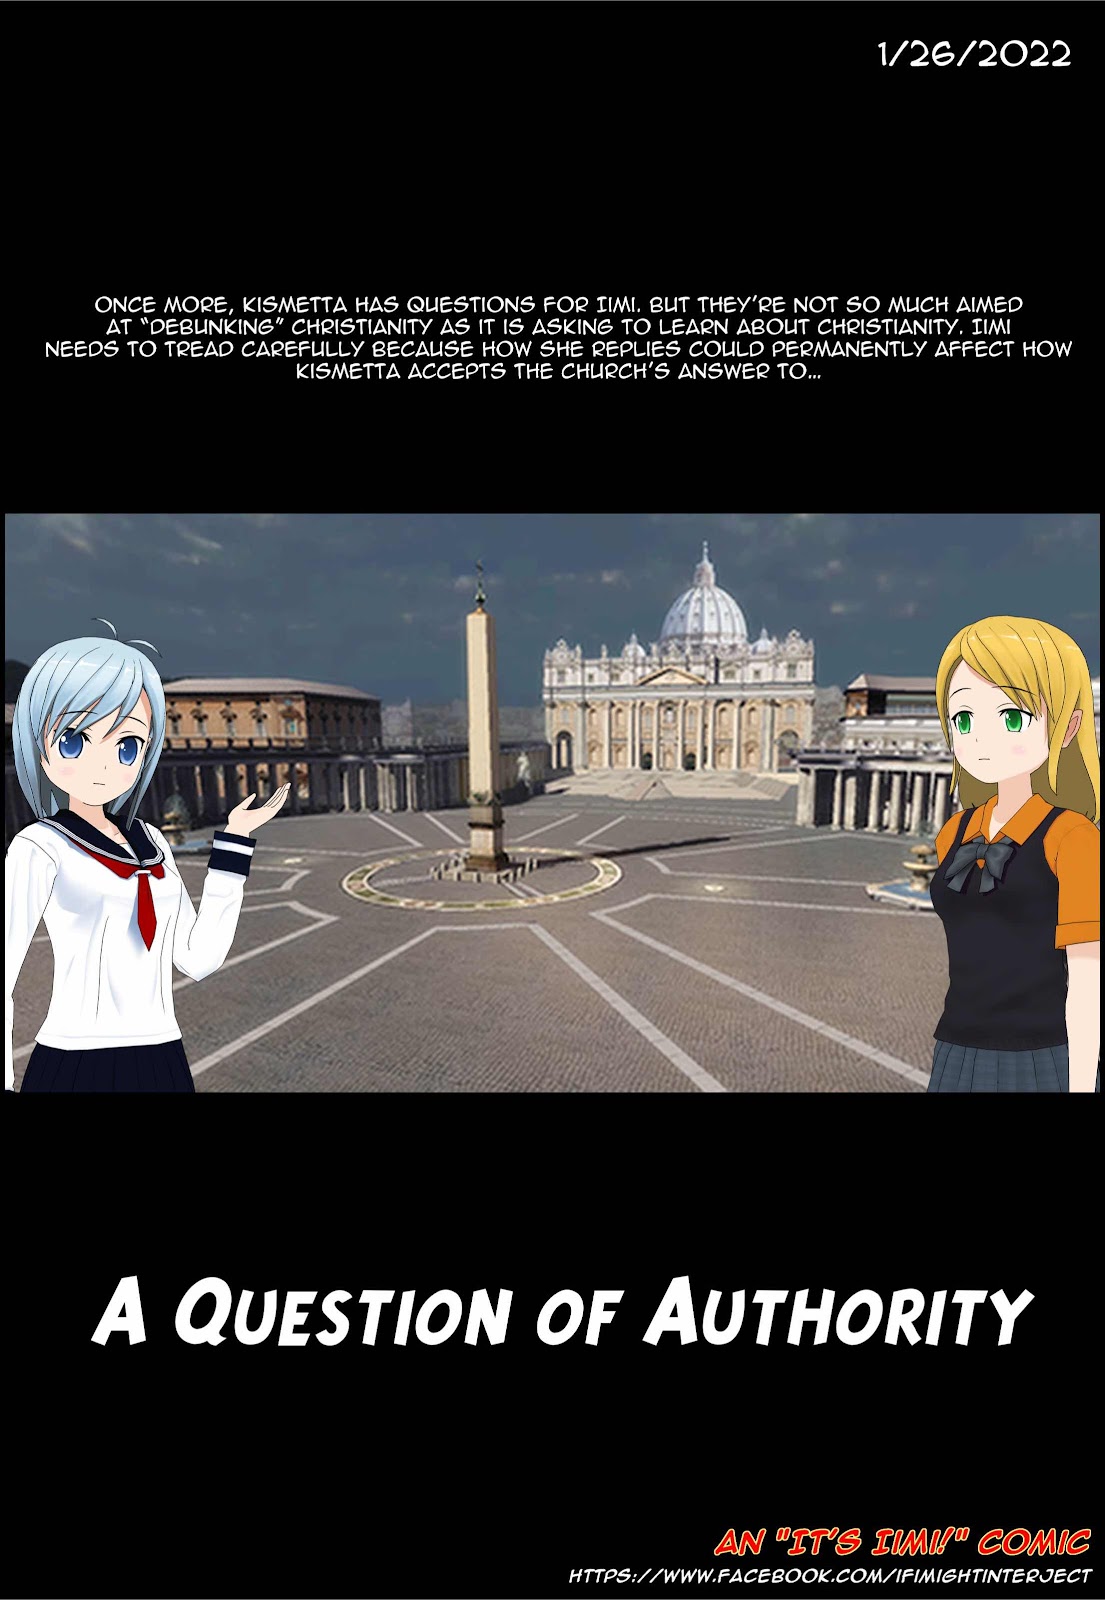 It’s Iimi! A Question of Authority